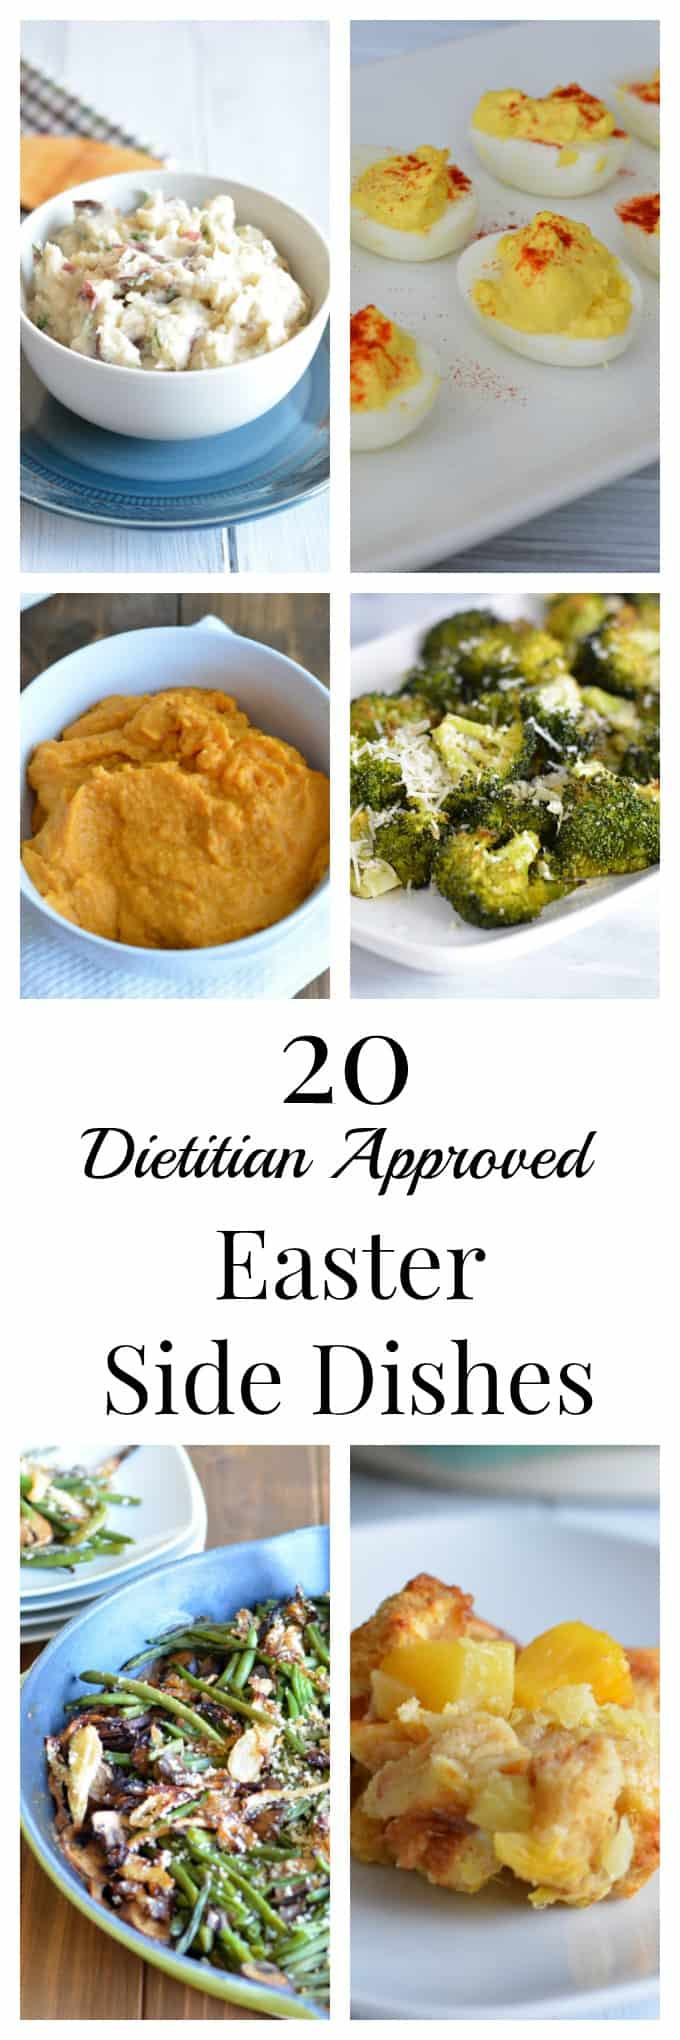 Easter Side Dishes Pinterest
 20 Dietitian Approved Easter Side Dishes Nourished Simply